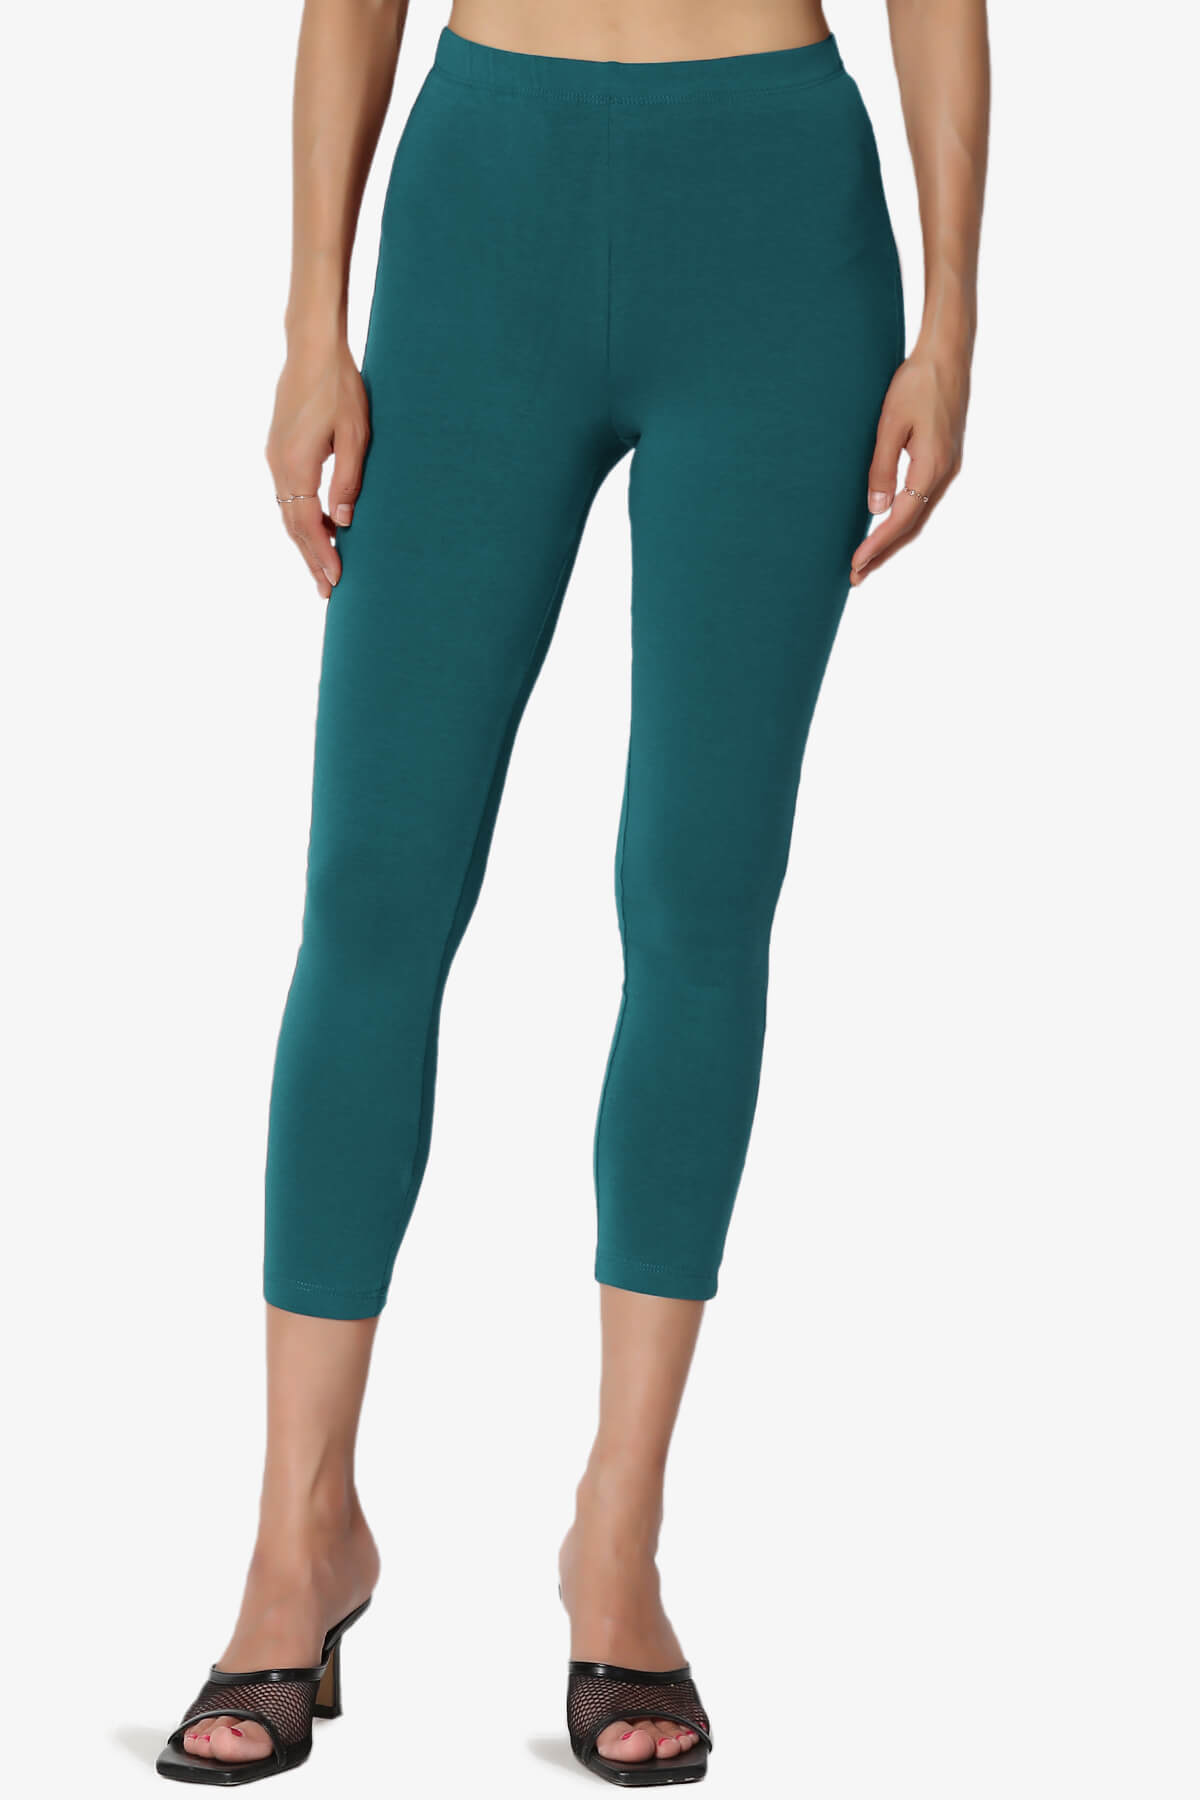 Load image into Gallery viewer, Ansley Luxe Cotton Capri Leggings TEAL_1
